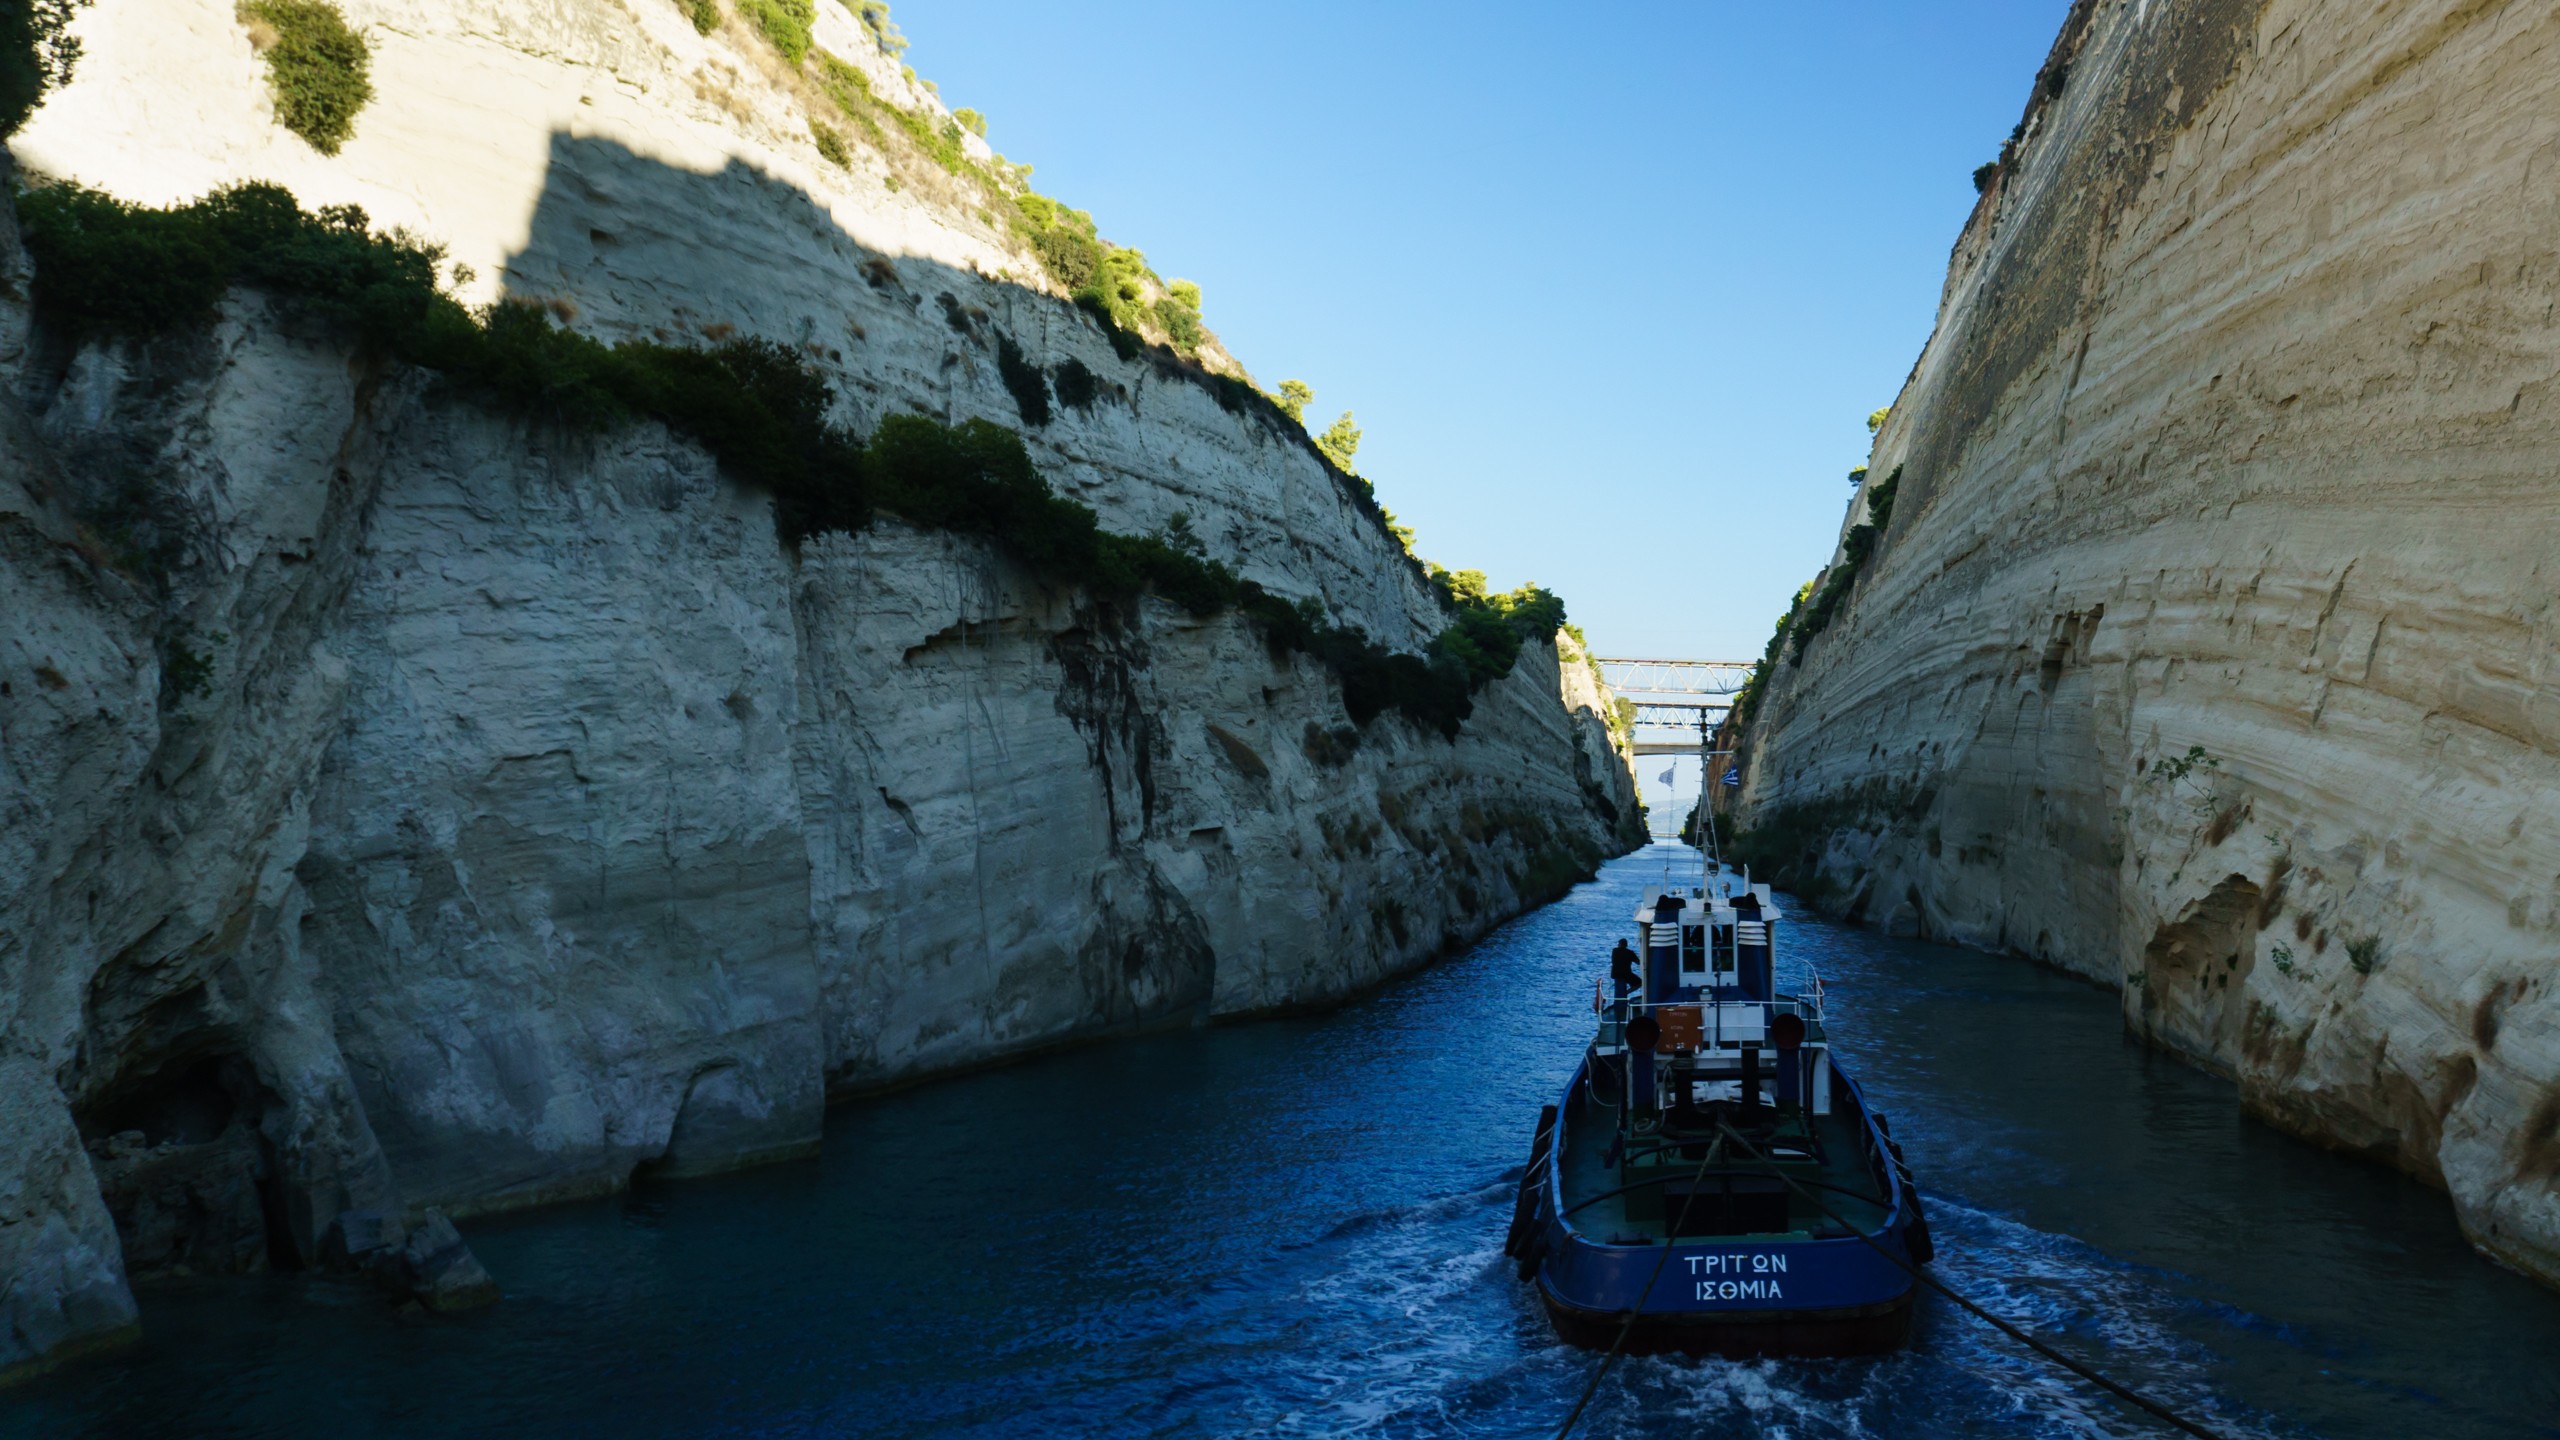 General 2560x1440 water rocks tugboat boat ship Greece sky blue sand cliff Corinth Canal vehicle